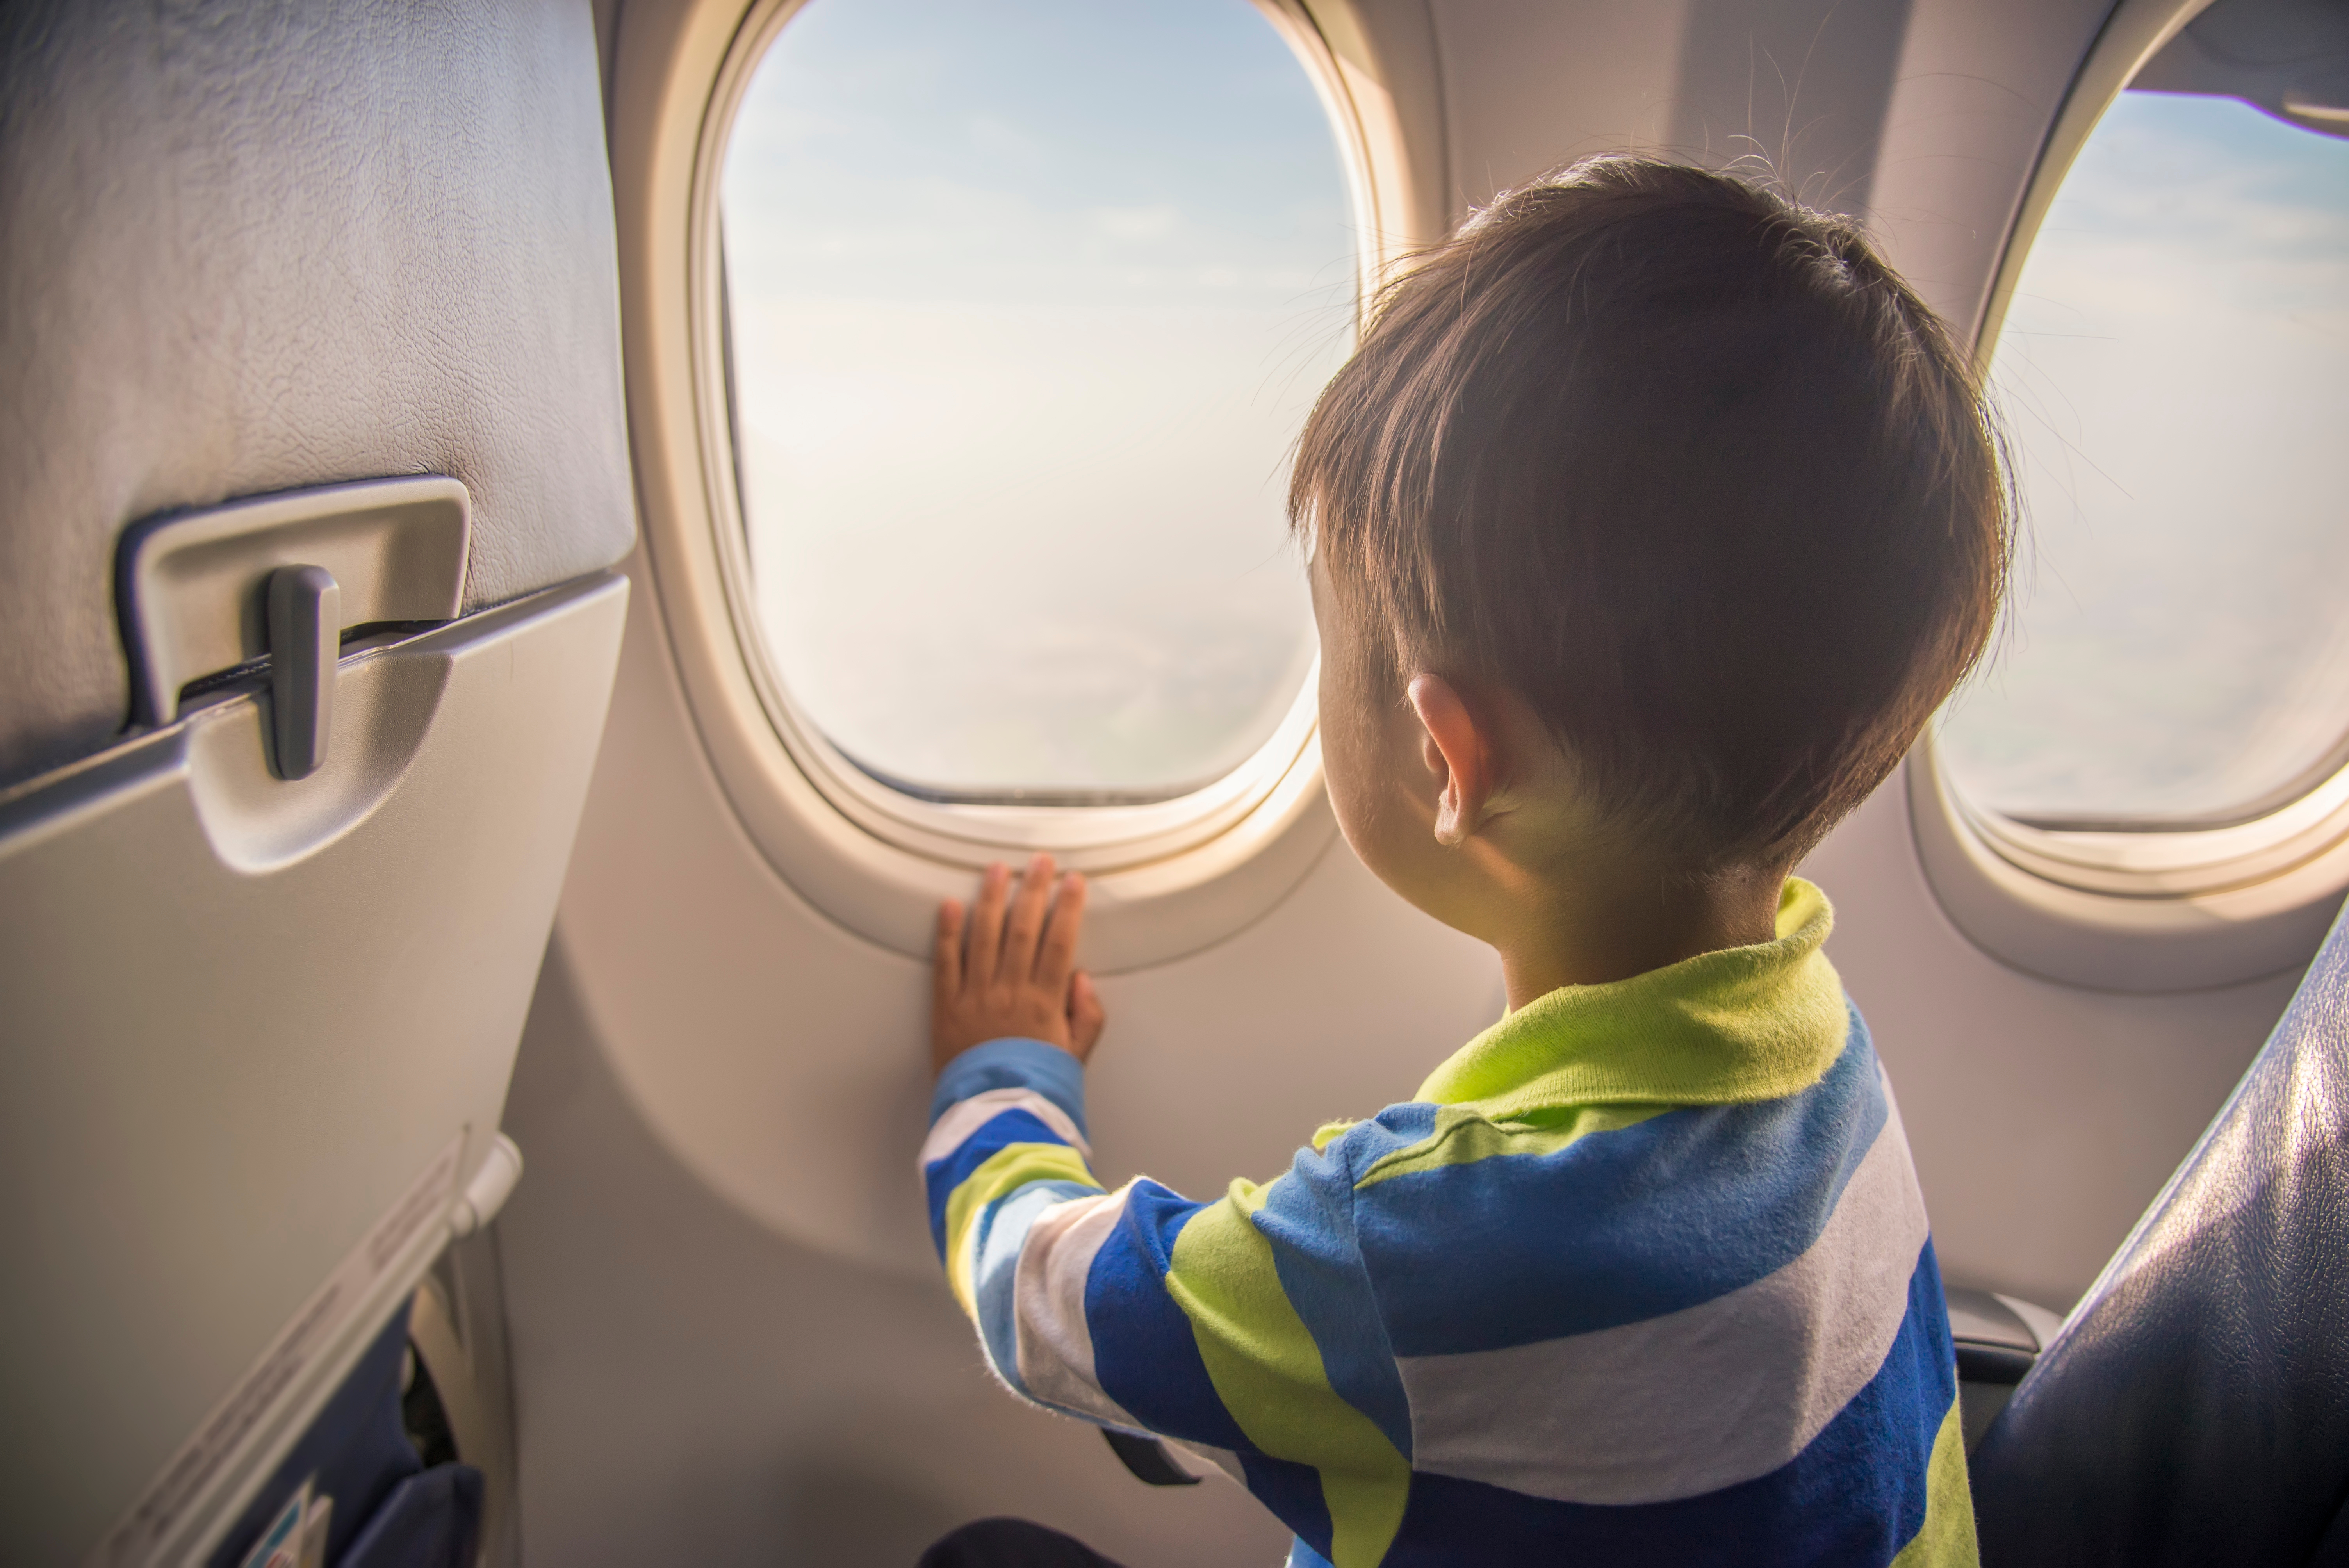 A child looking outside an airplane window | Source: Shutterstock